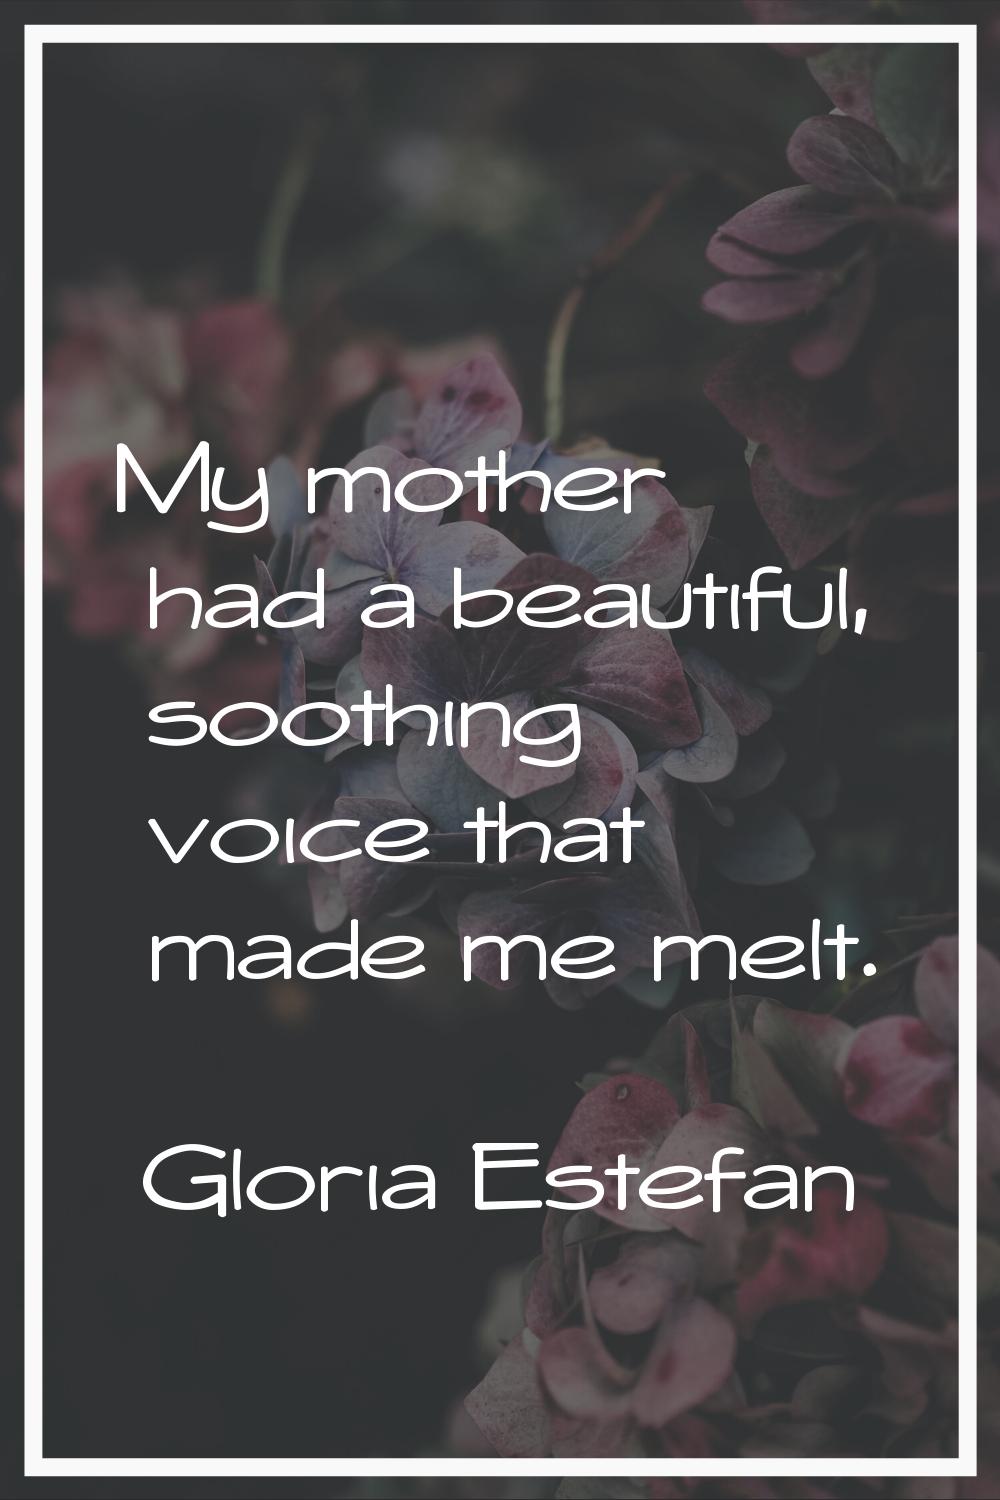 My mother had a beautiful, soothing voice that made me melt.